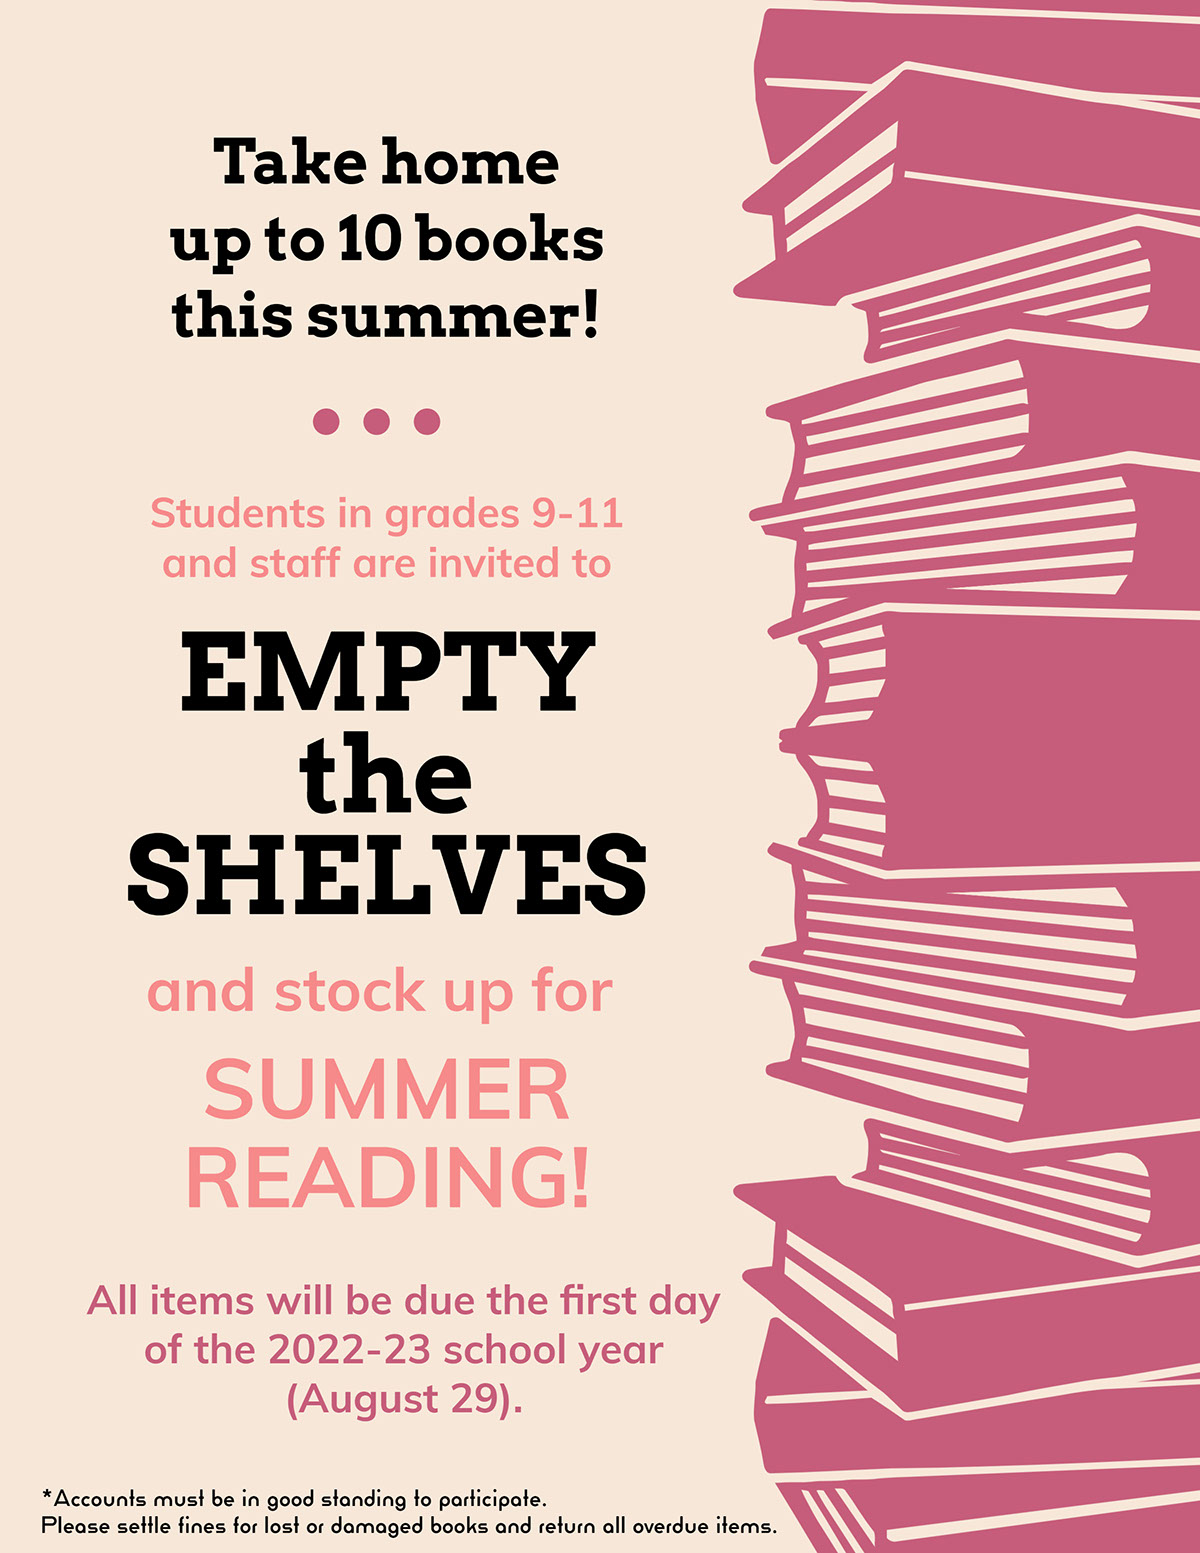 EMPTY the SHELVES EMPTY the SHELVES SUMMER READING! Take home up to 10 books this summer! and stock up for Students in grades 9-11 and staff are invited to All items will be due the first day of the 2022-23 school year (August 29). *Accounts must be in good standing to participate. Please settle fines for lost or damaged books and return all overdue items.